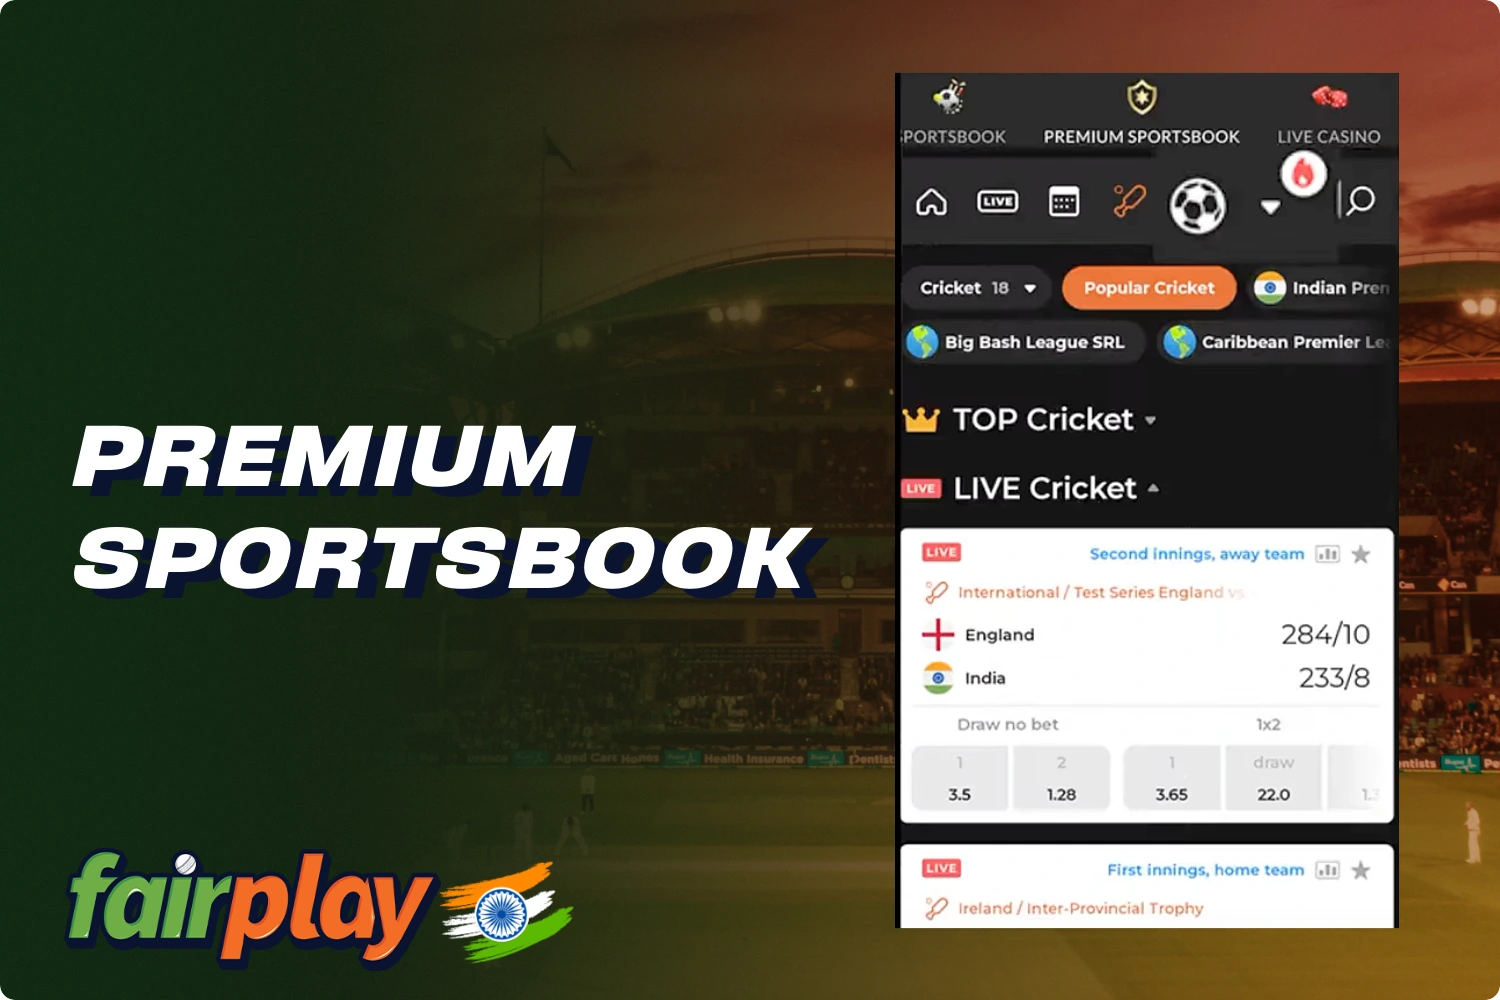 Premium sportsbook at Fairplay gives users access to even more sports disciplines